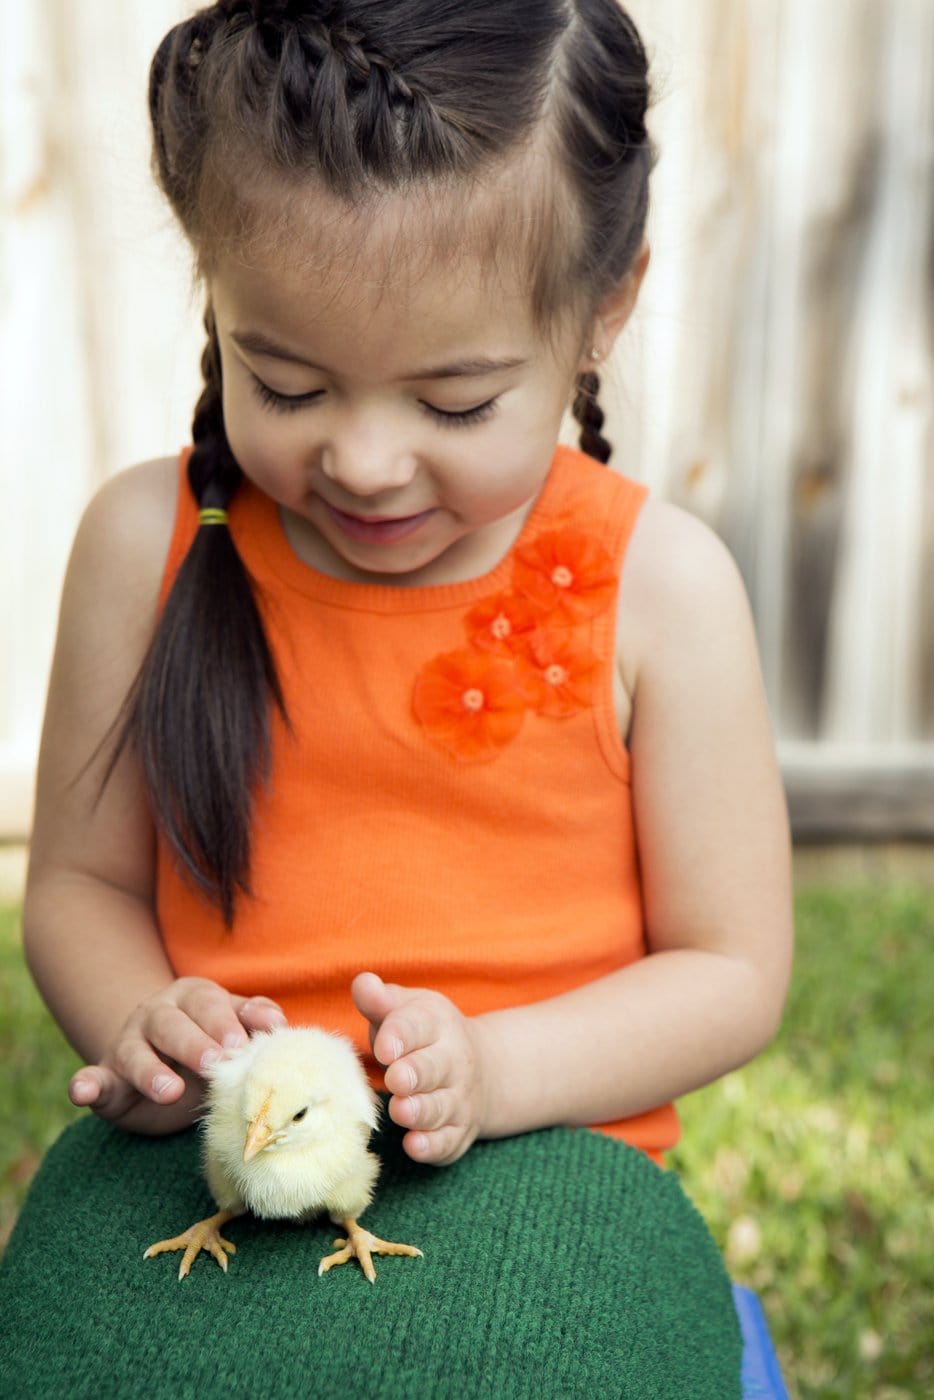 Little girl with a baby chick